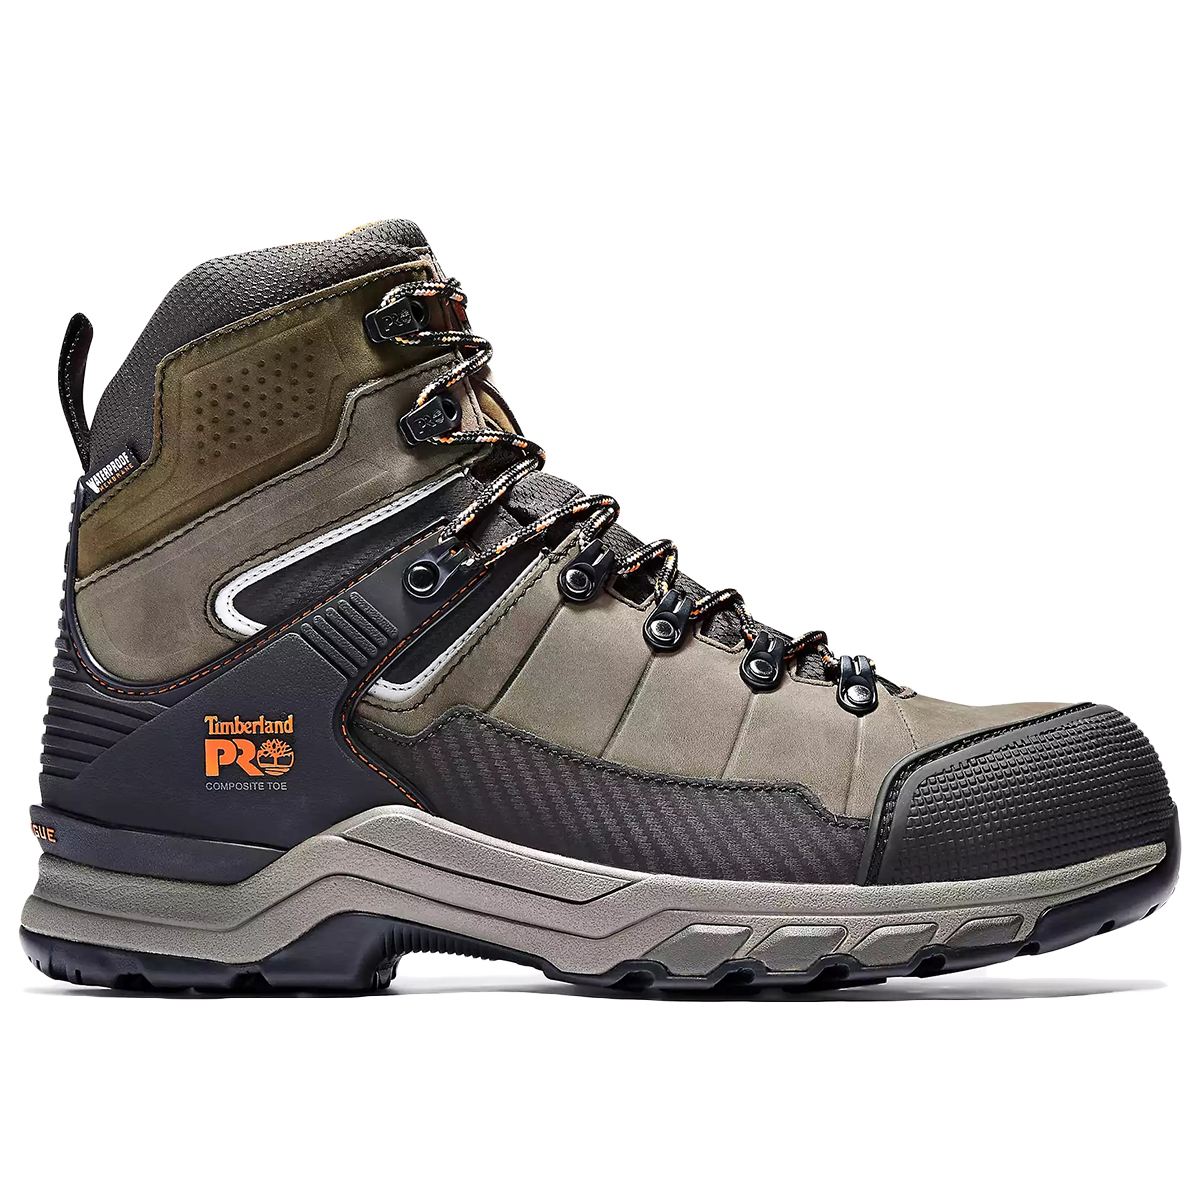 Timberland Pro Men's A25Gp 6" Hypercharge Comp Toe Waterproof Work Boots